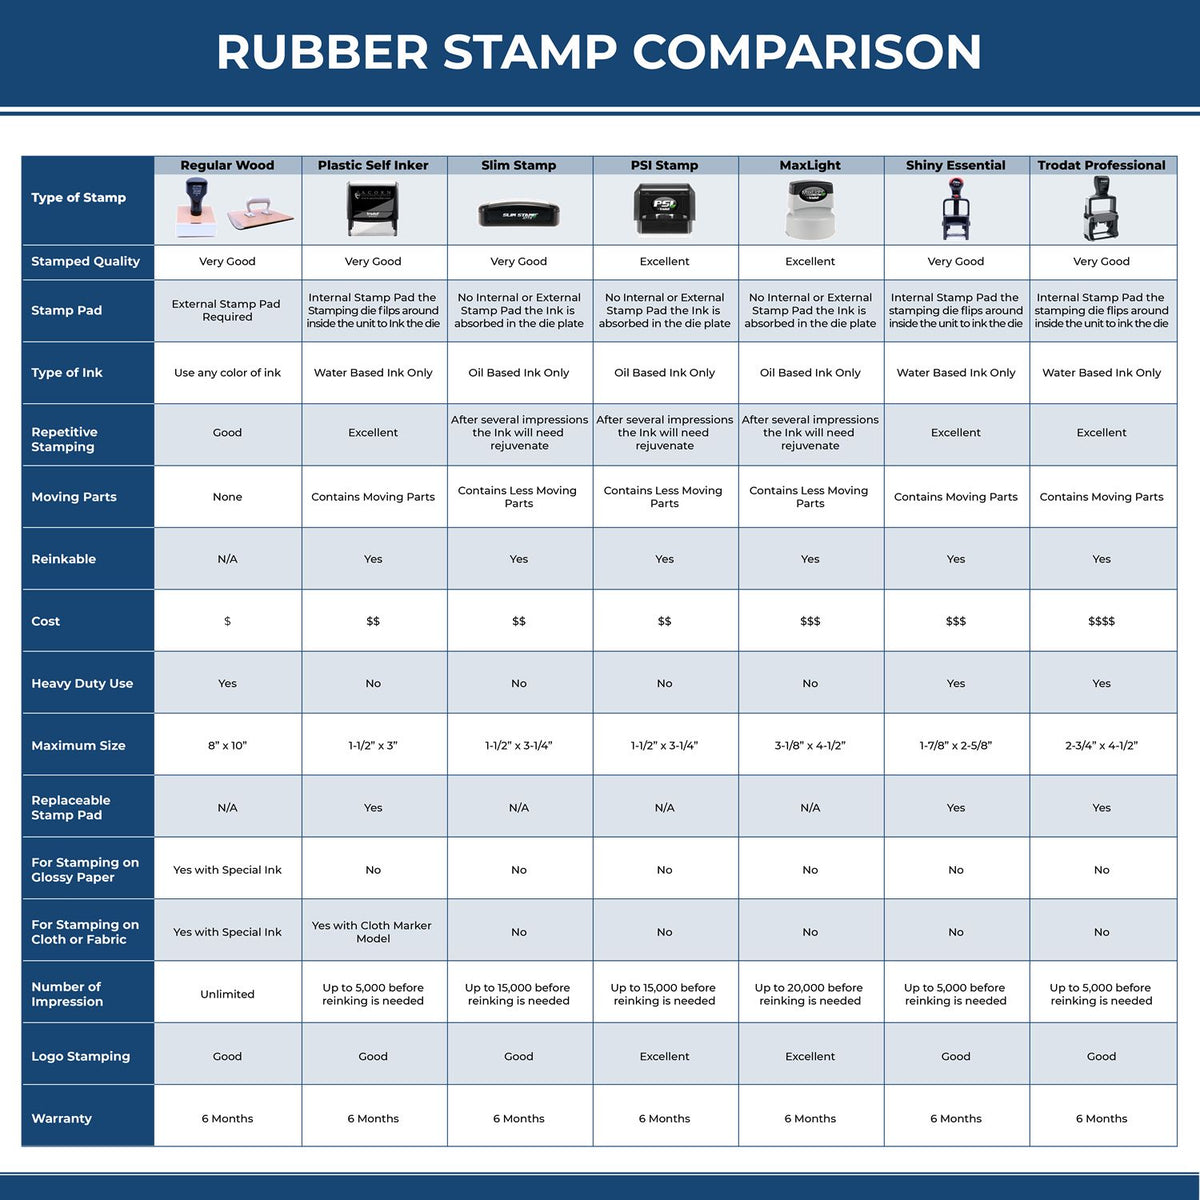 A comparison chart for the different types of mount models available for the Vermont Landscape Architectural Seal Stamp.